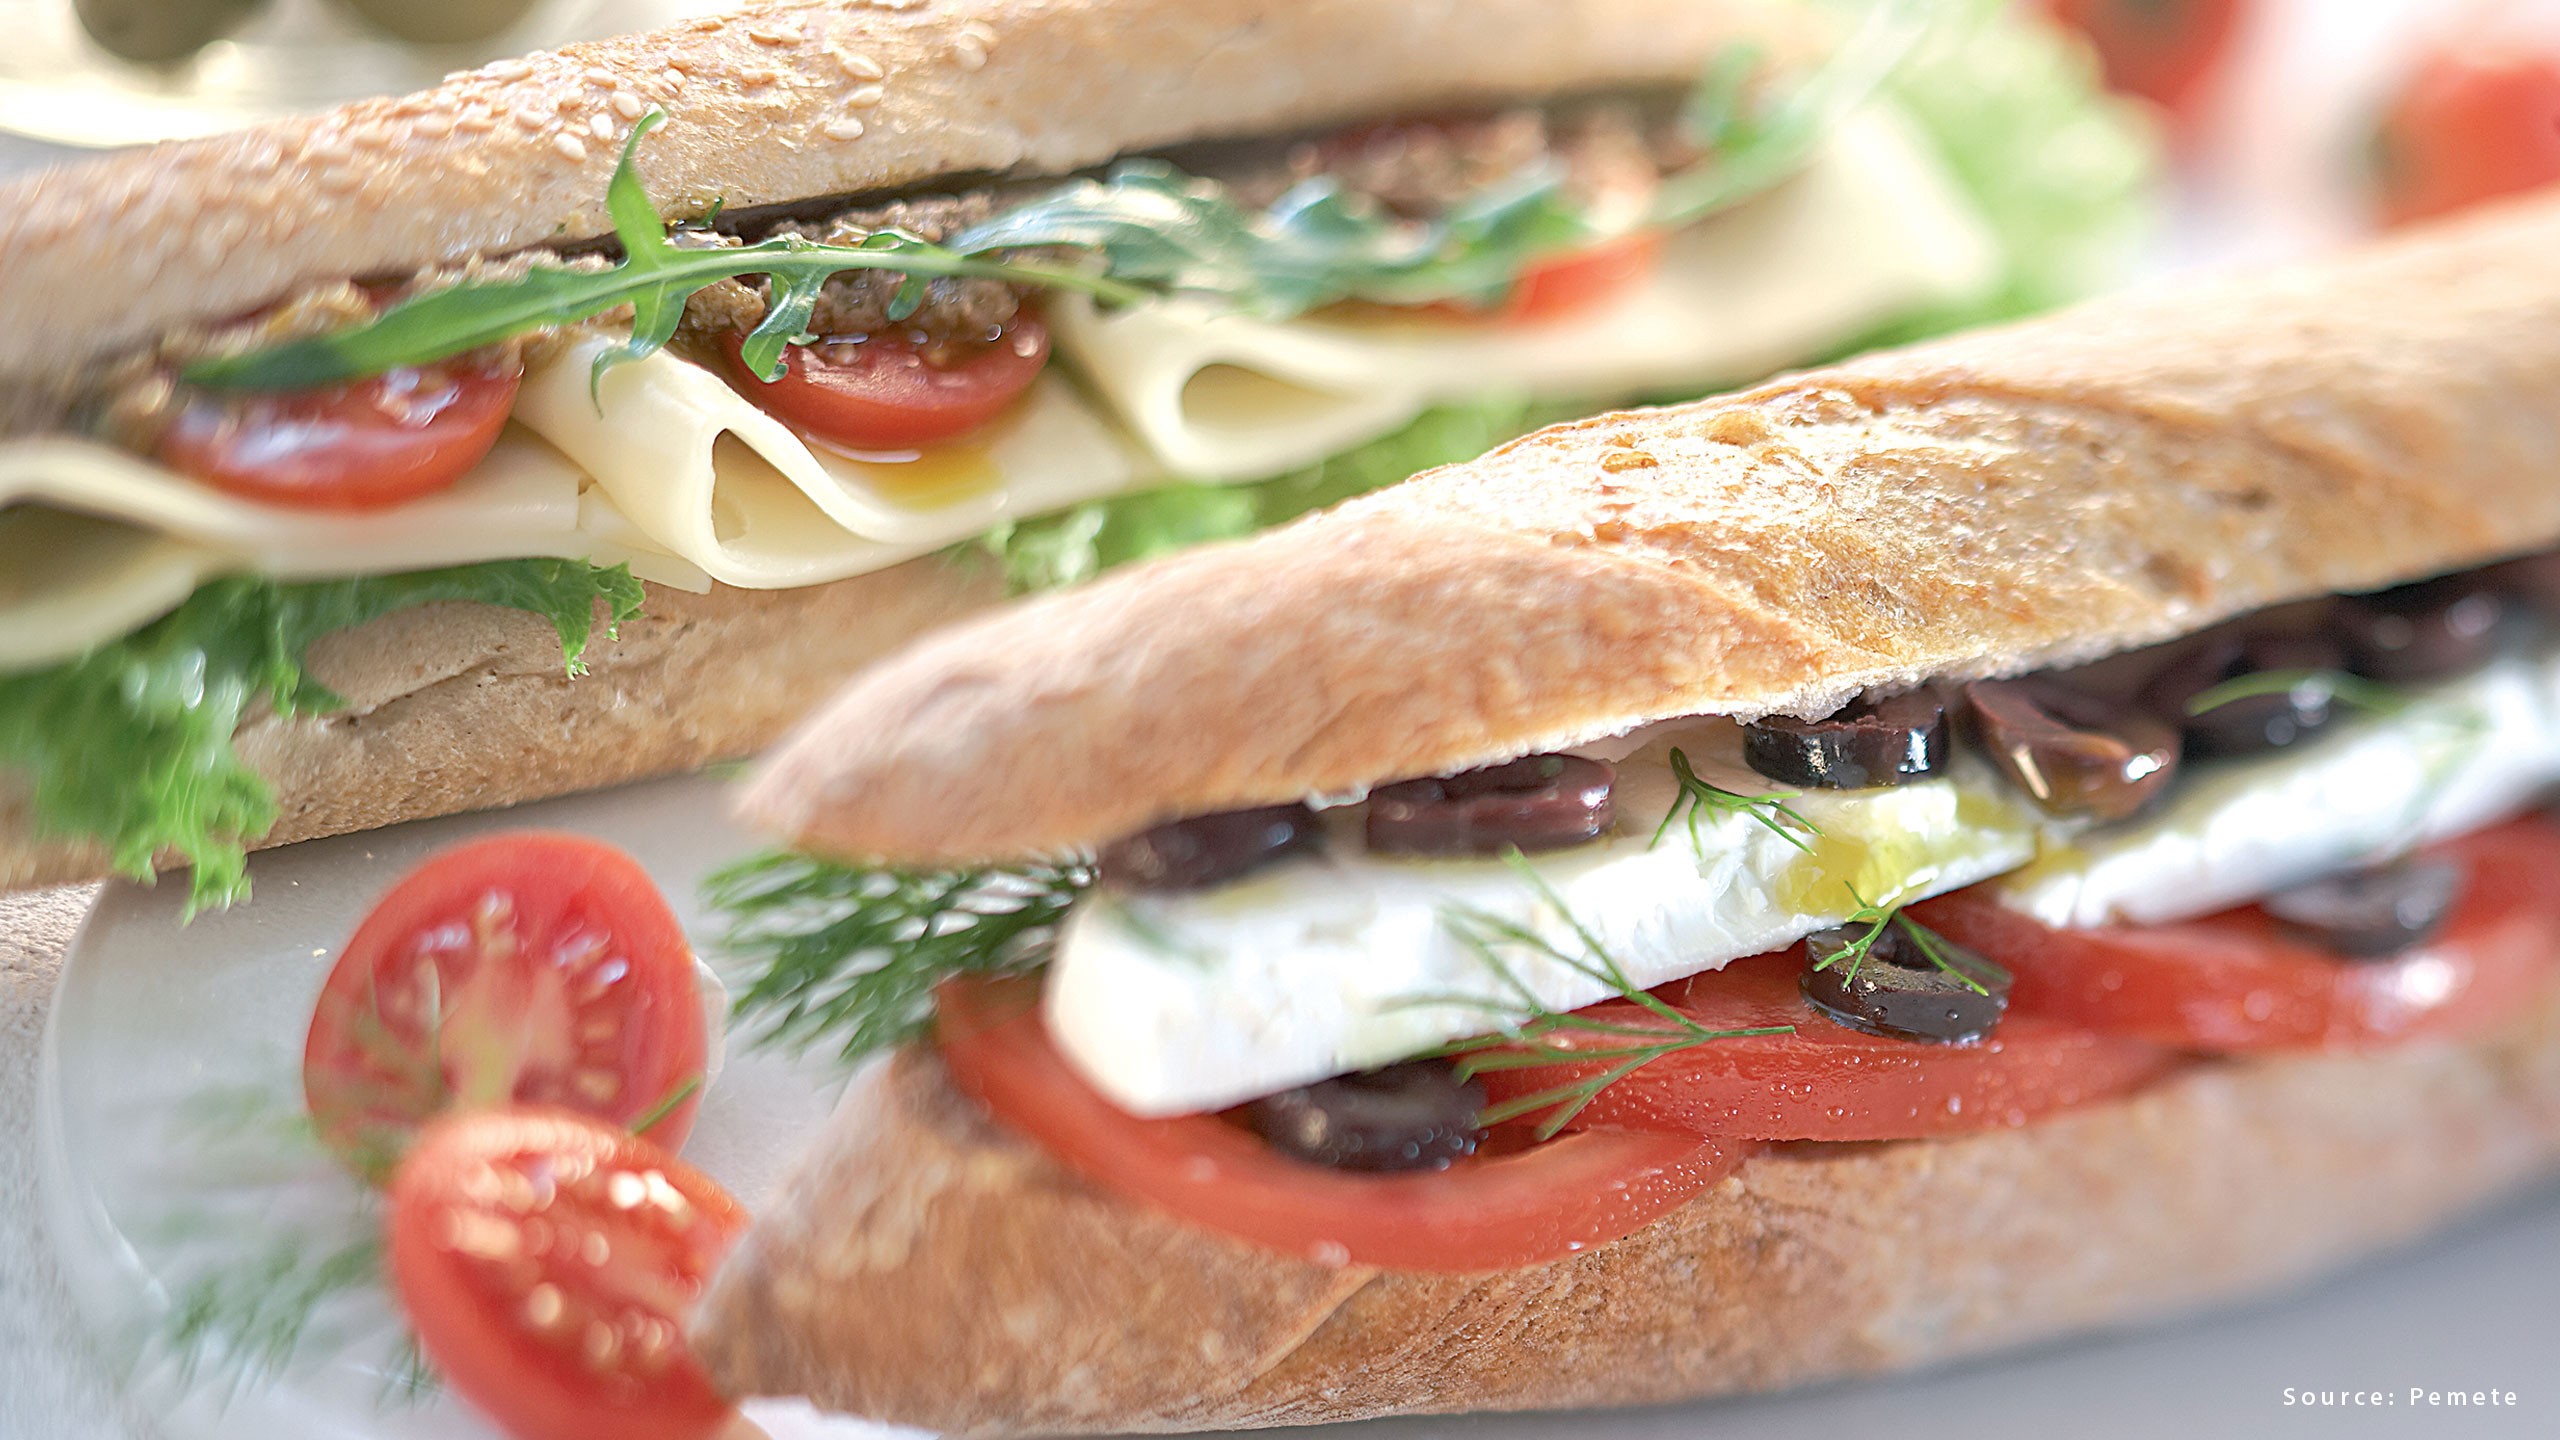 Mediterraneadn sandwich made with Kalamata olives or Green olive tapenade and Feta PDO cheese